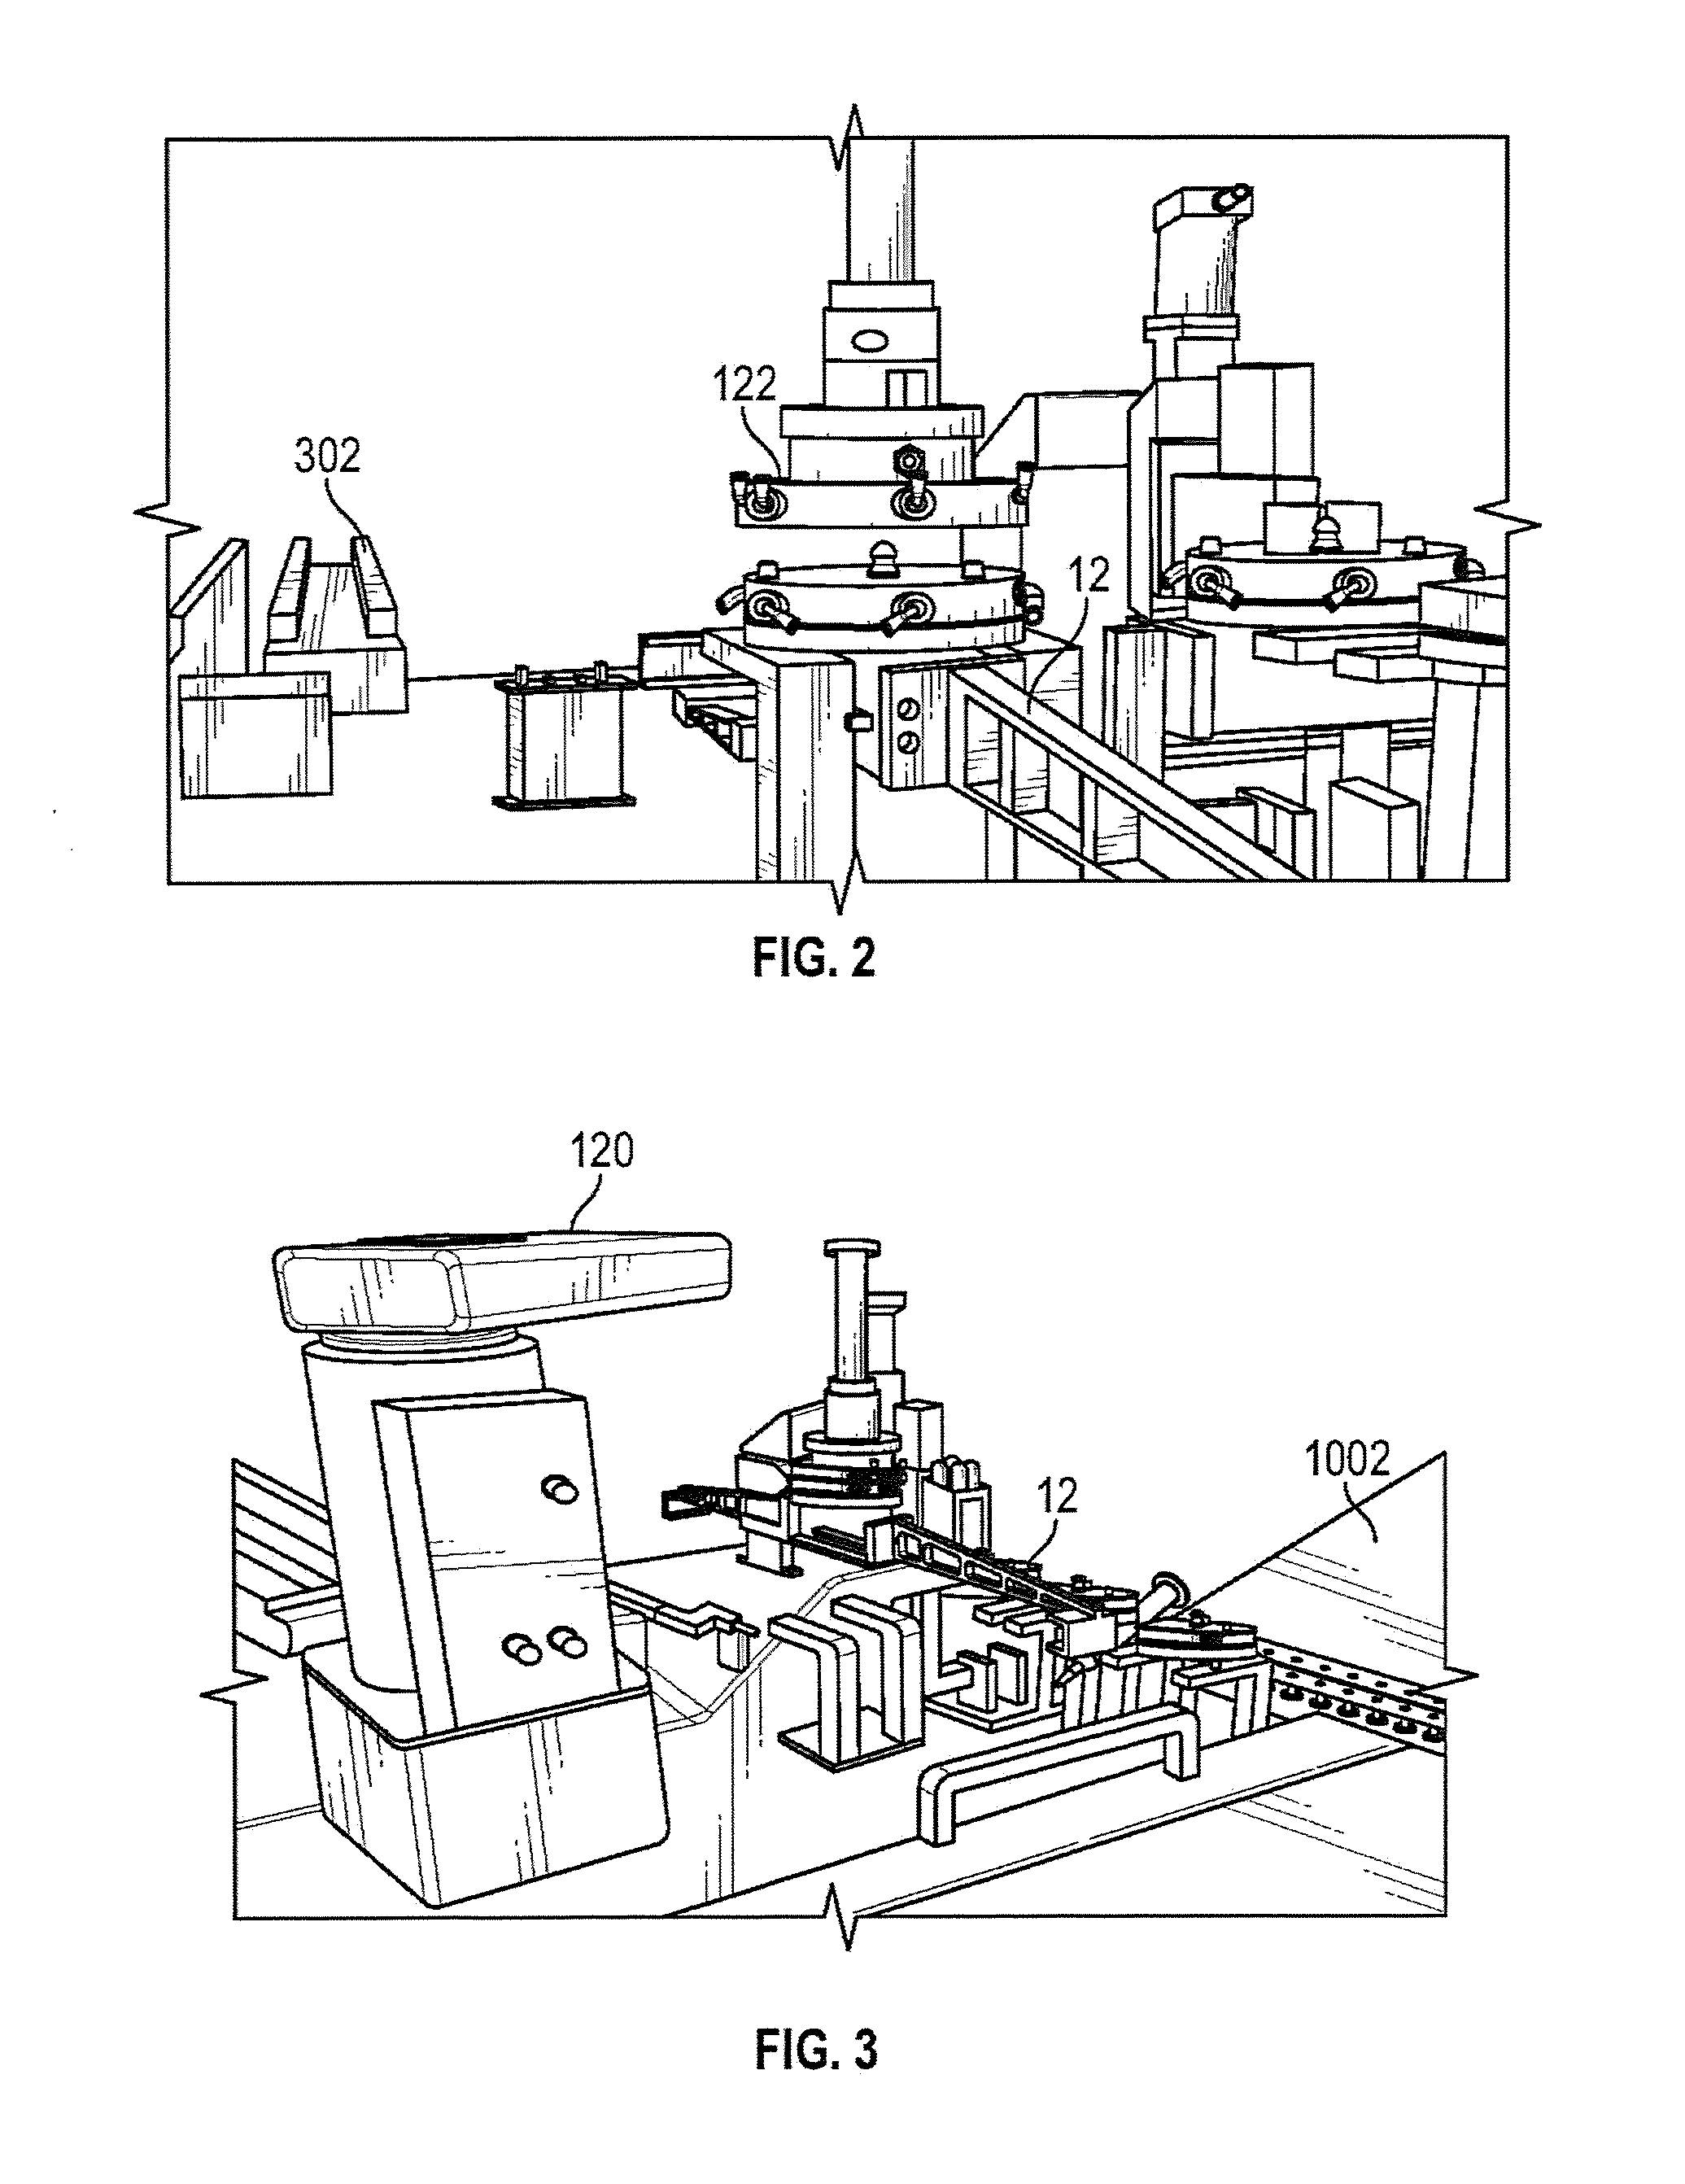 System and method for producing modular photovoltaic panel assemblies for space solar arrays